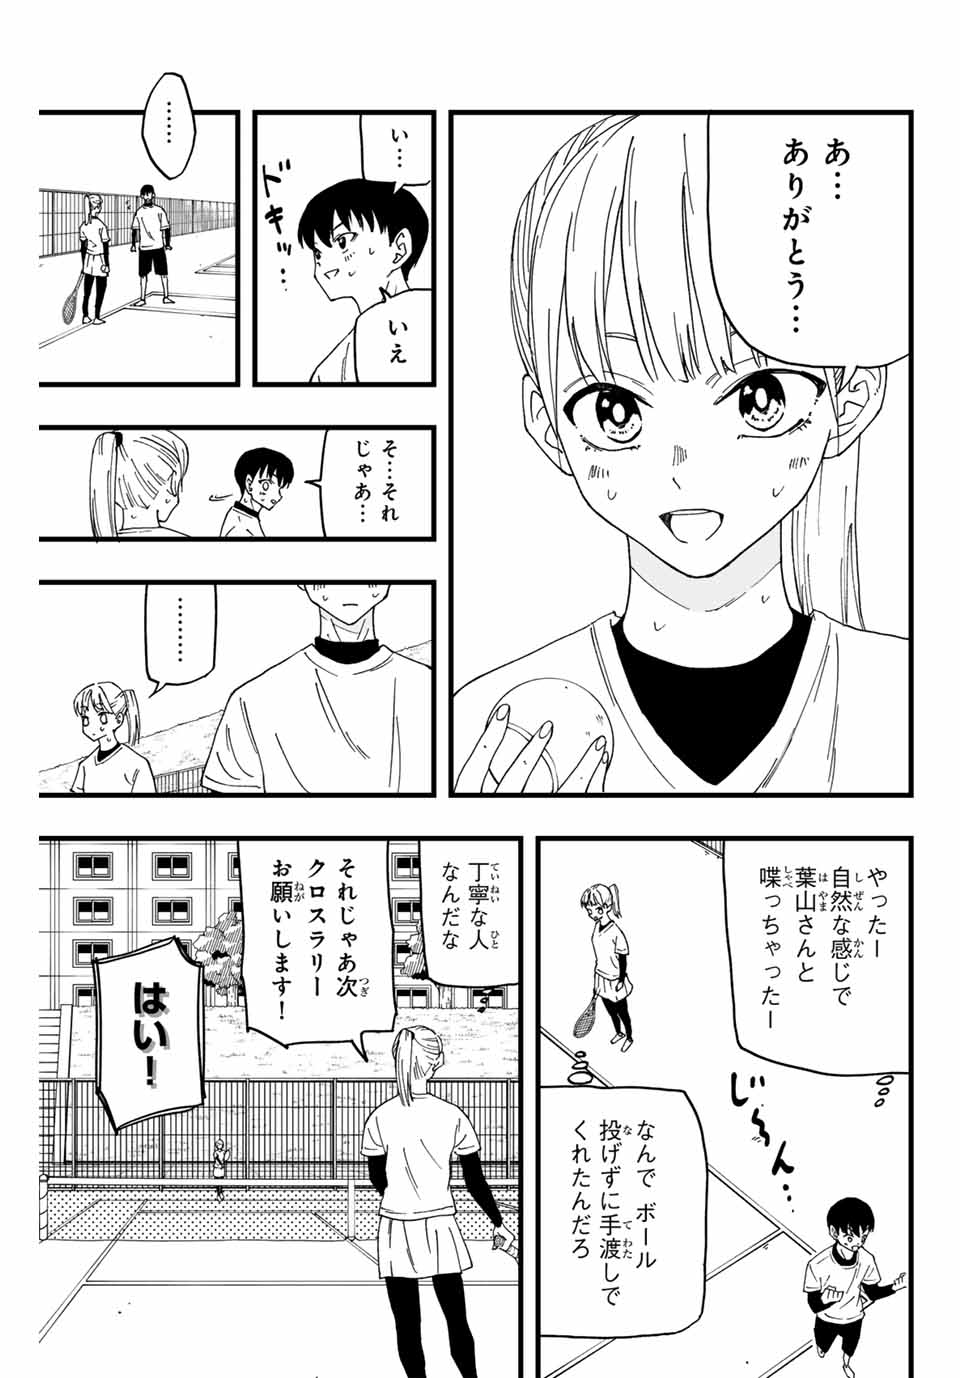 LoVE GAME 第2話 - Page 13